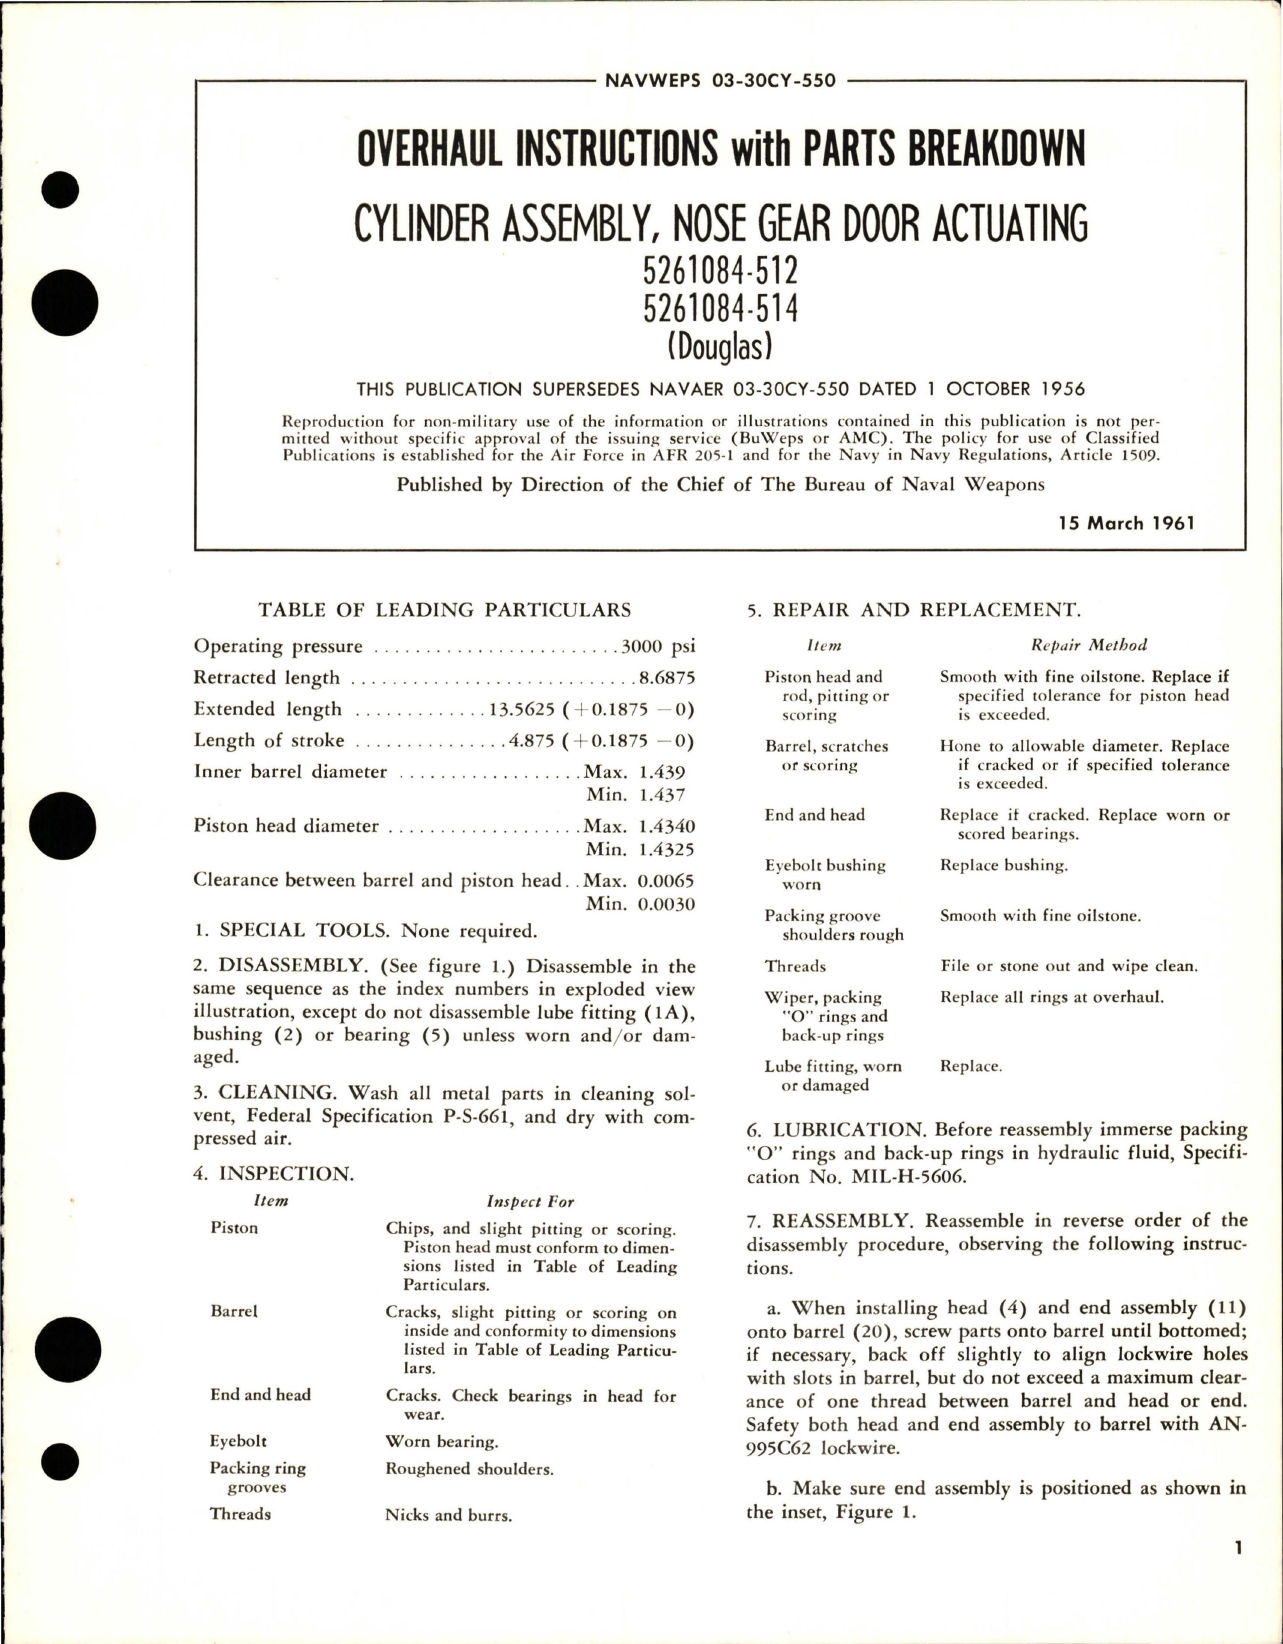 Sample page 1 from AirCorps Library document: Overhaul Instructions with Parts Breakdown for Nose Gear Door Actuating Cylinder Assembly - 5261084-512, 5261084-514